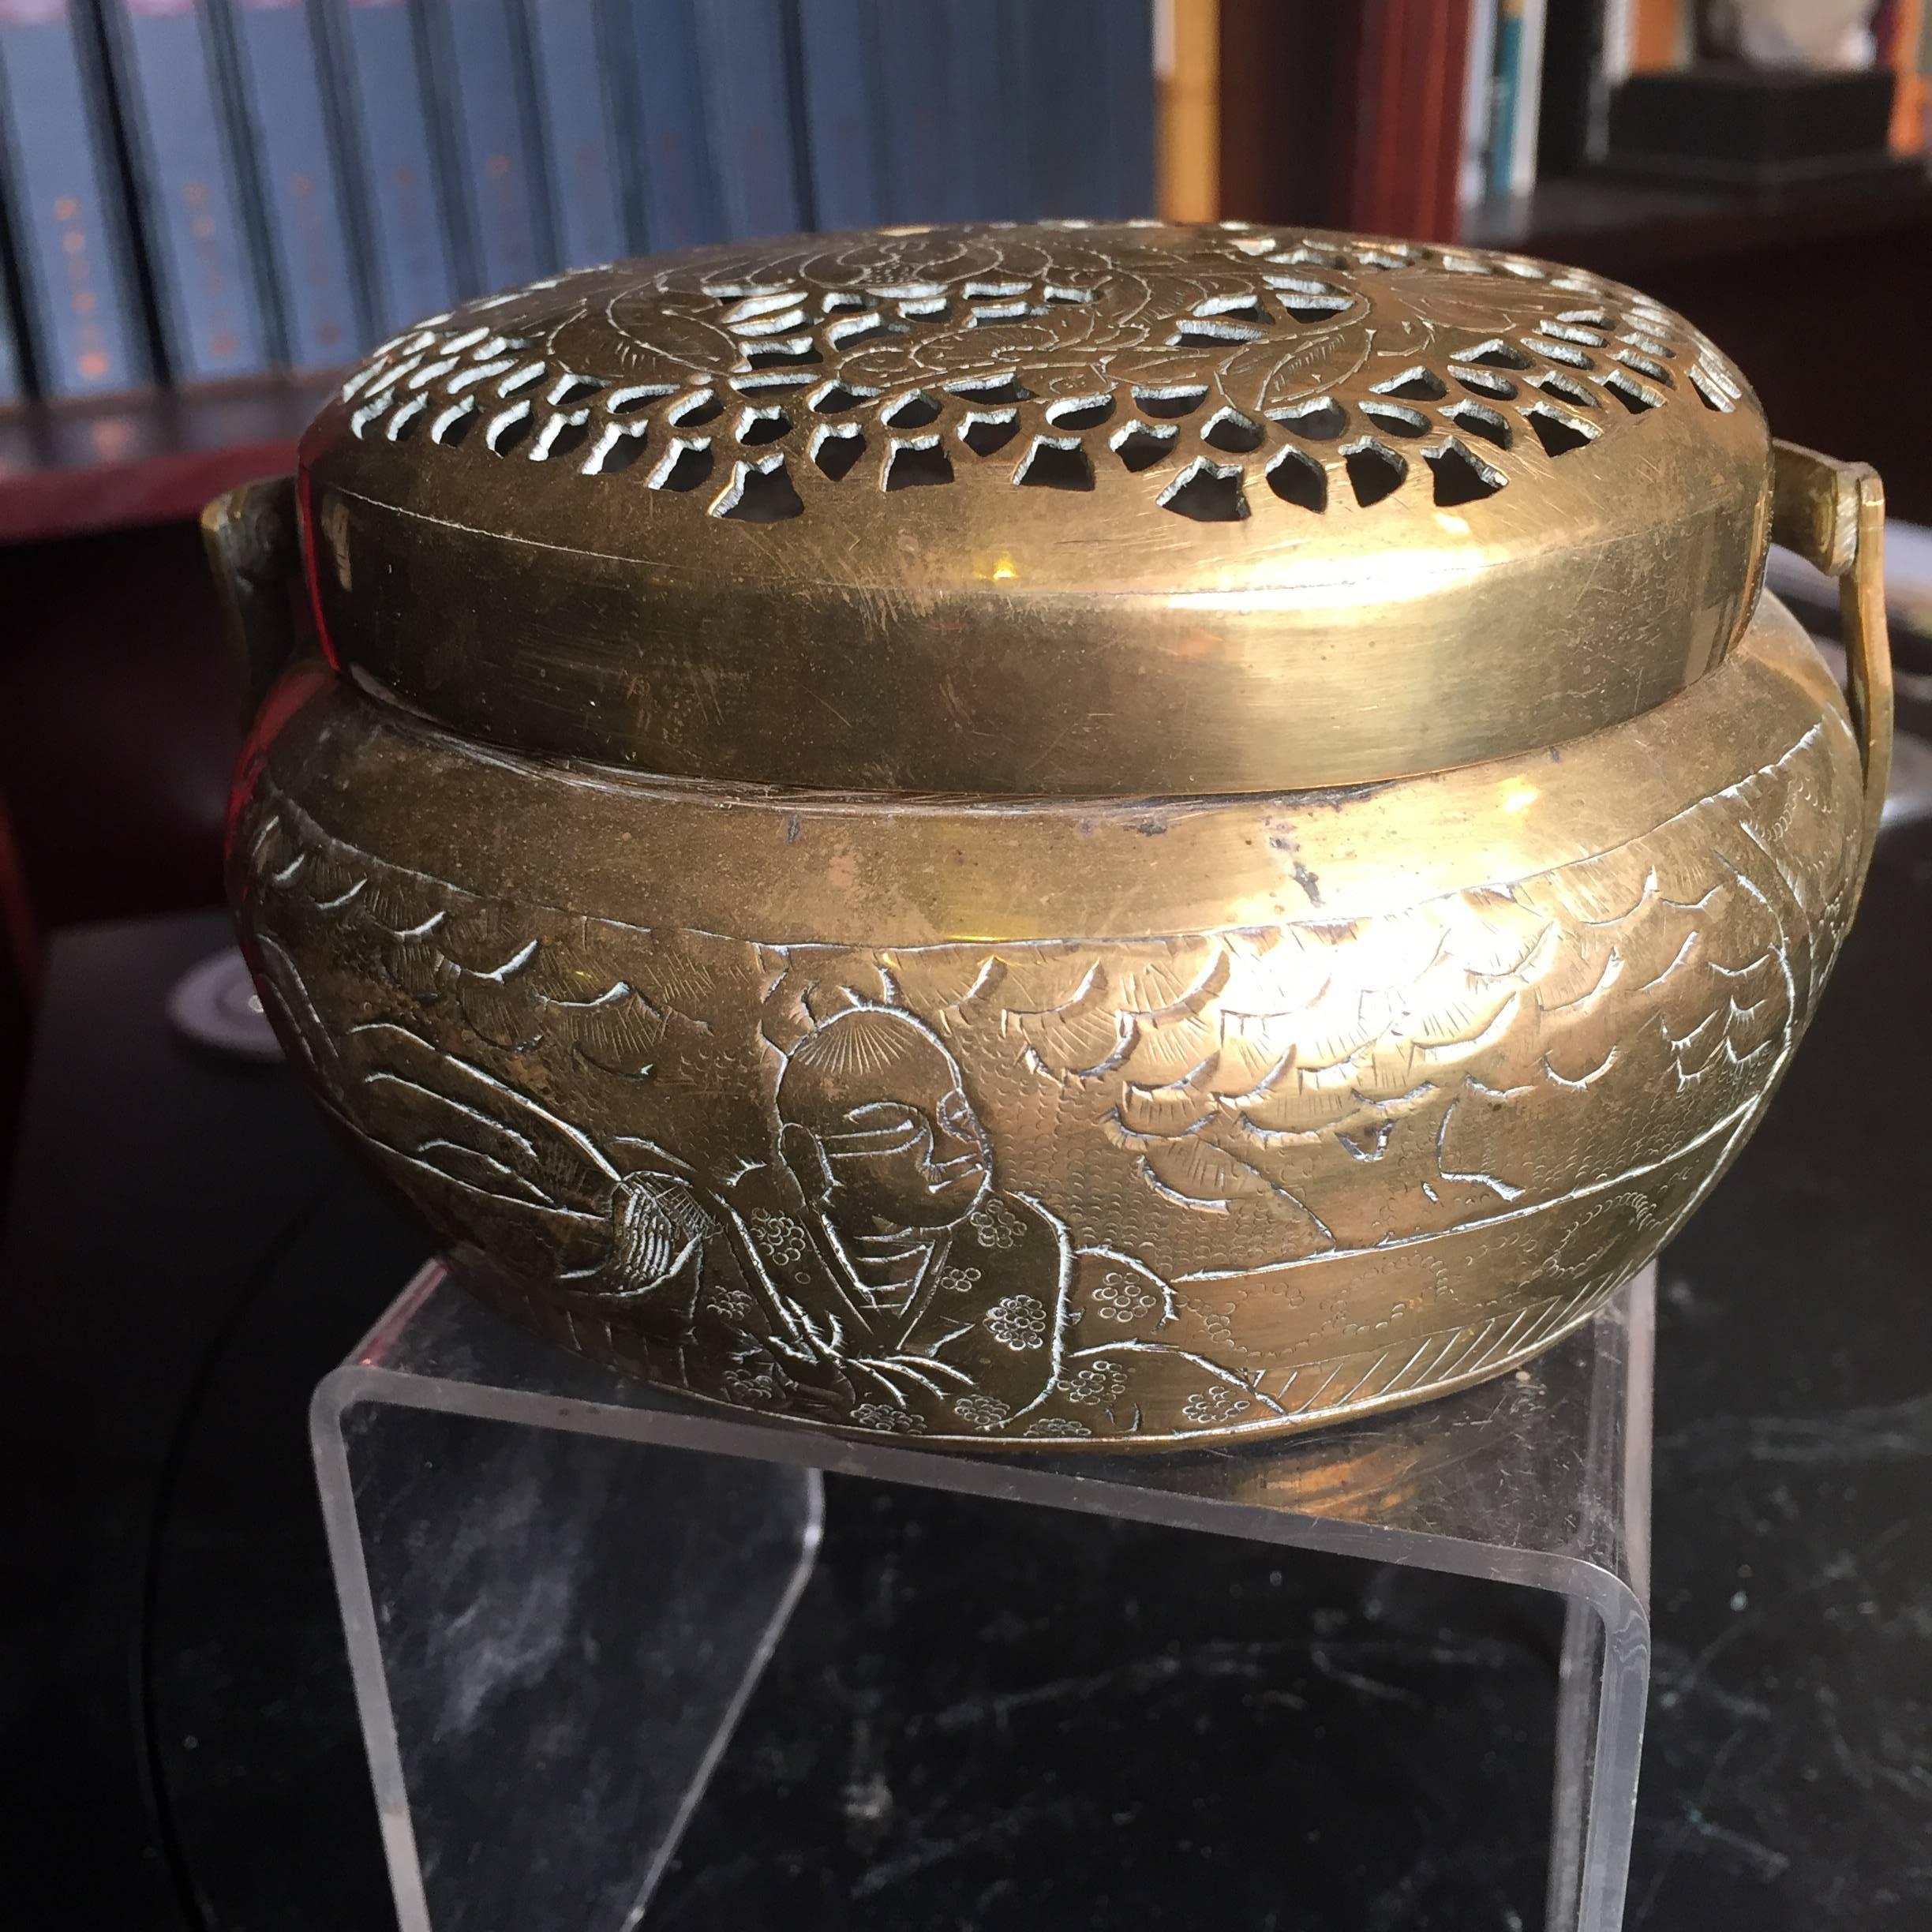 Chinese China Antique Metal Hand Warmer and Incense Burner, 100 Years Old